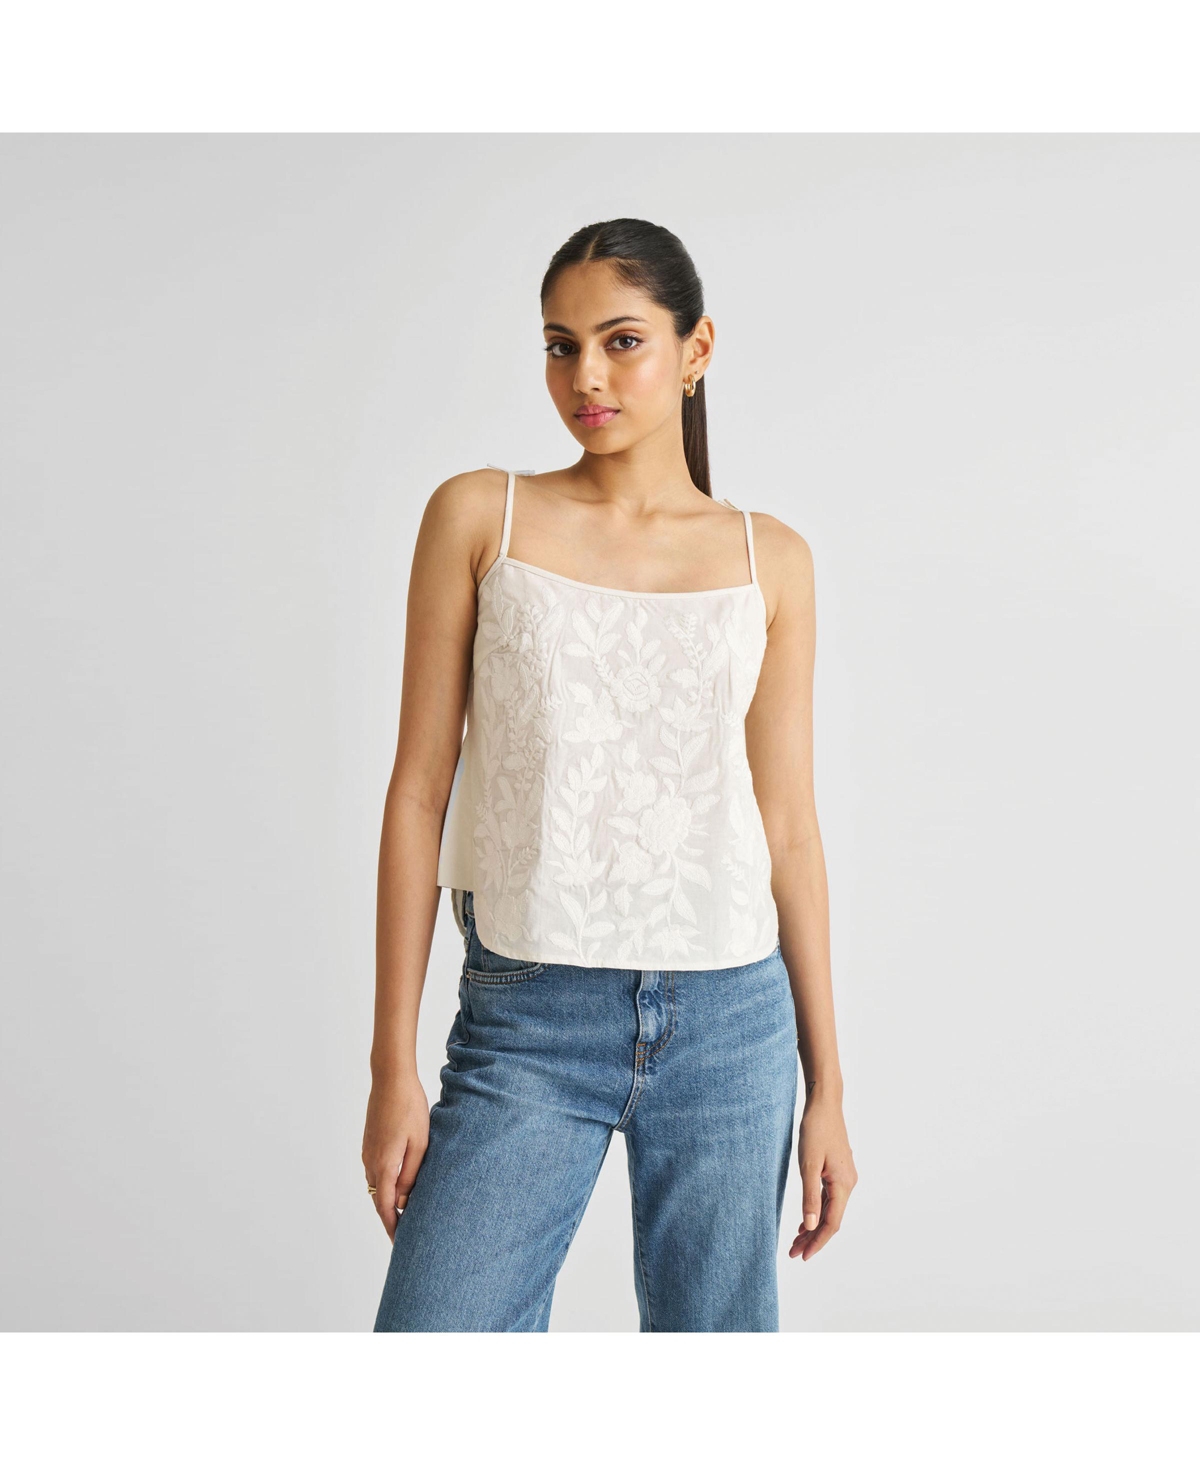 Embroidered Camisole Top - Coconut white